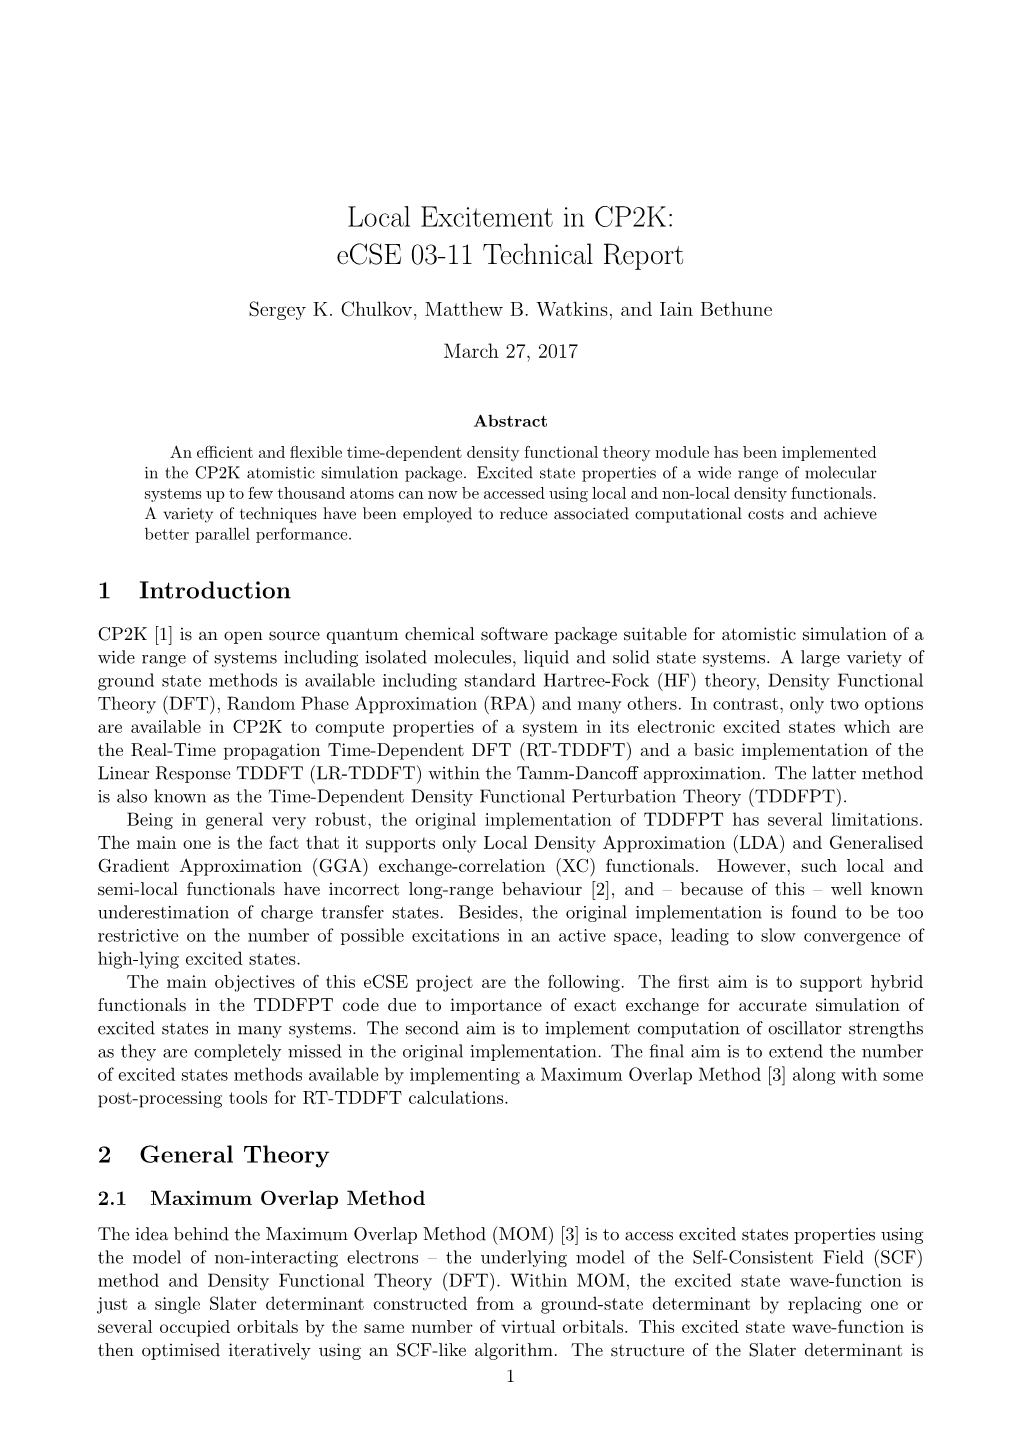 Local Excitement in CP2K: Ecse 03-11 Technical Report